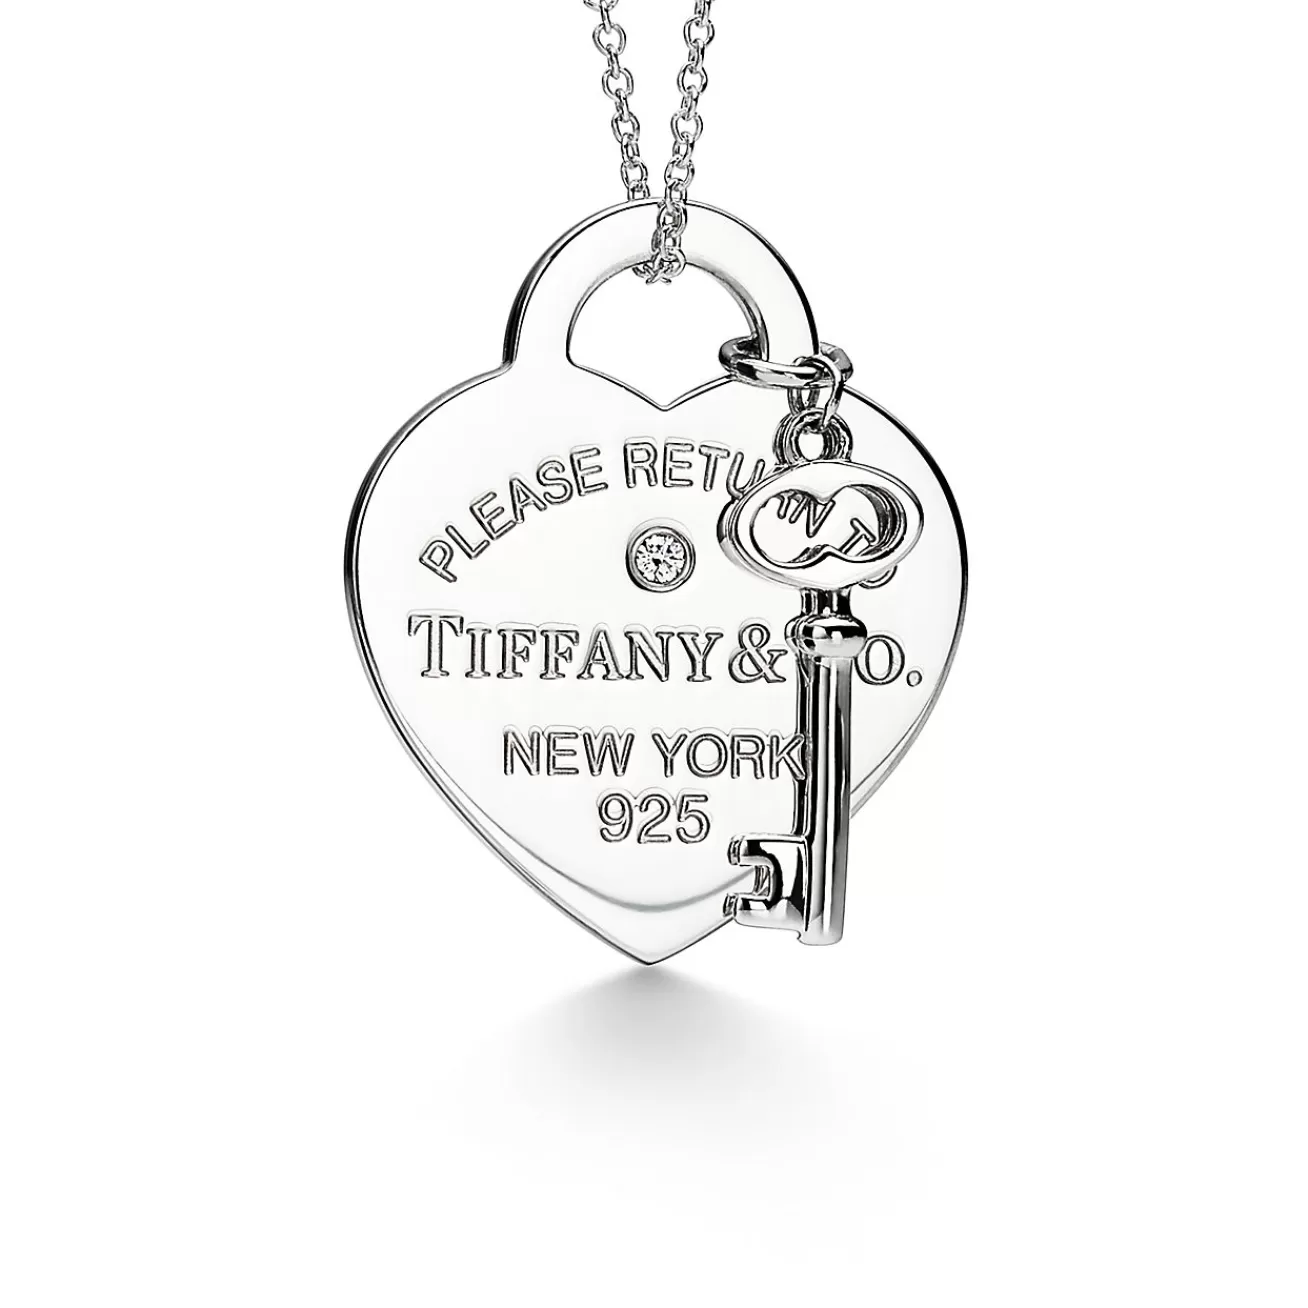 Tiffany & Co. Return to Tiffany® Heart Tag and Key Necklace in Silver with a Diamond, Medium | ^ Necklaces & Pendants | Sterling Silver Jewelry